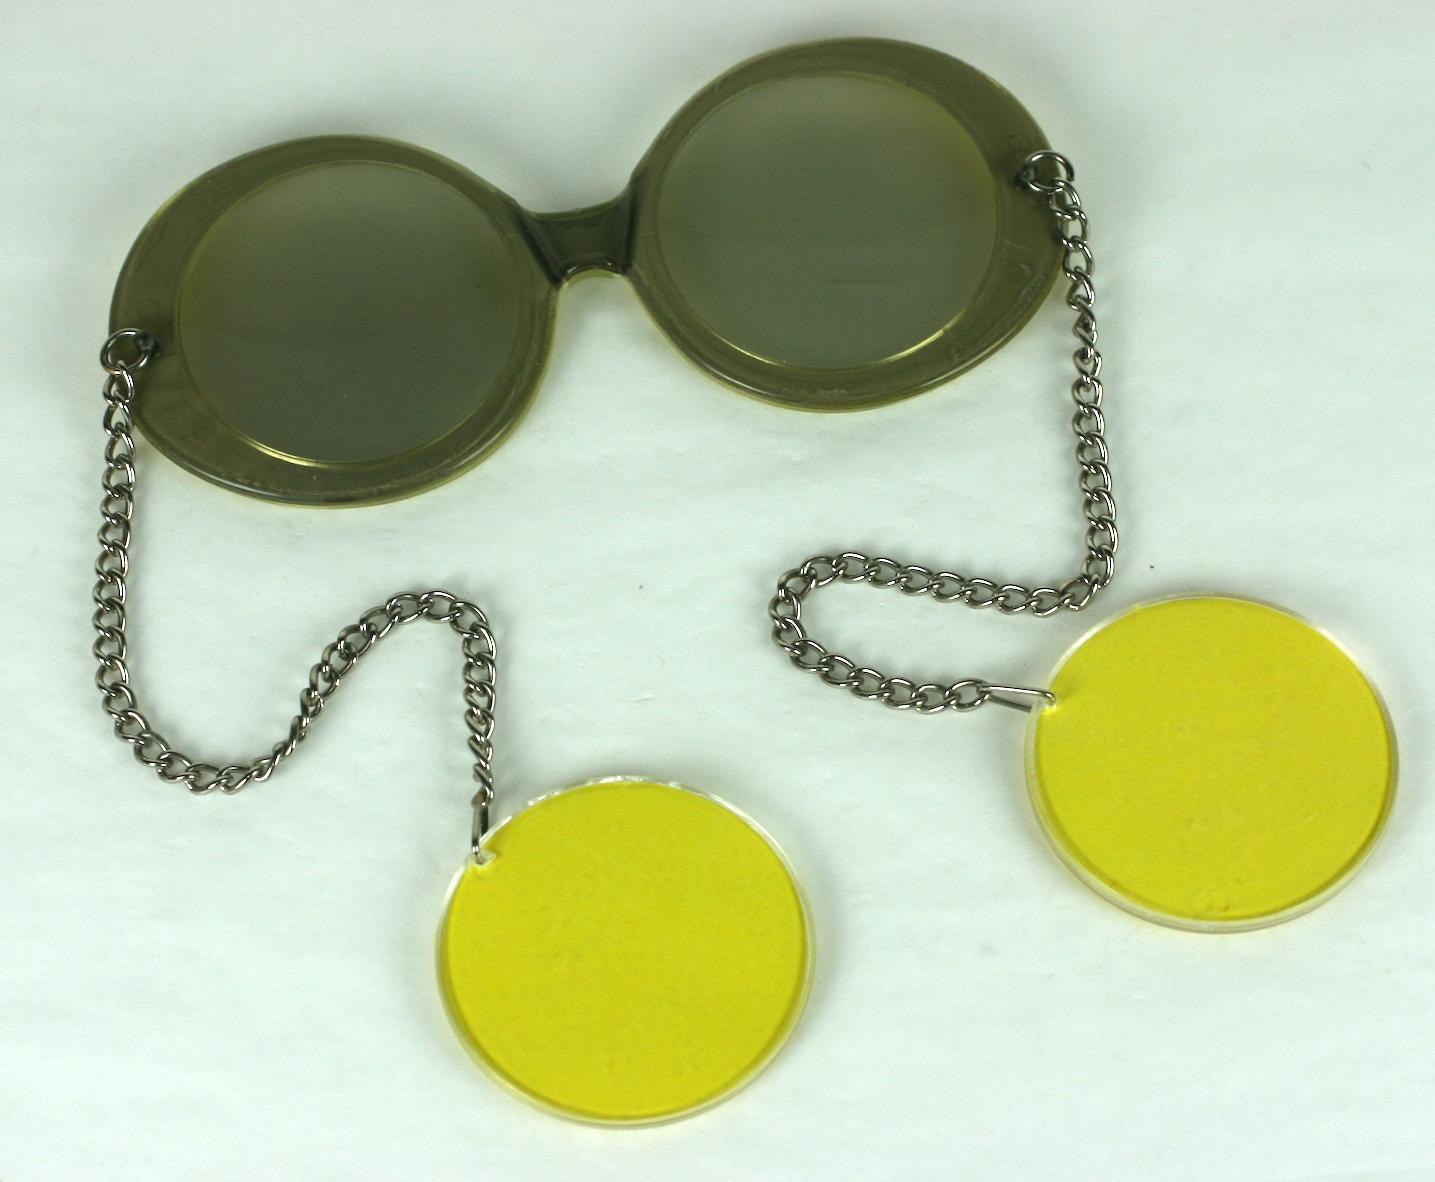 sunglasses with earrings attached